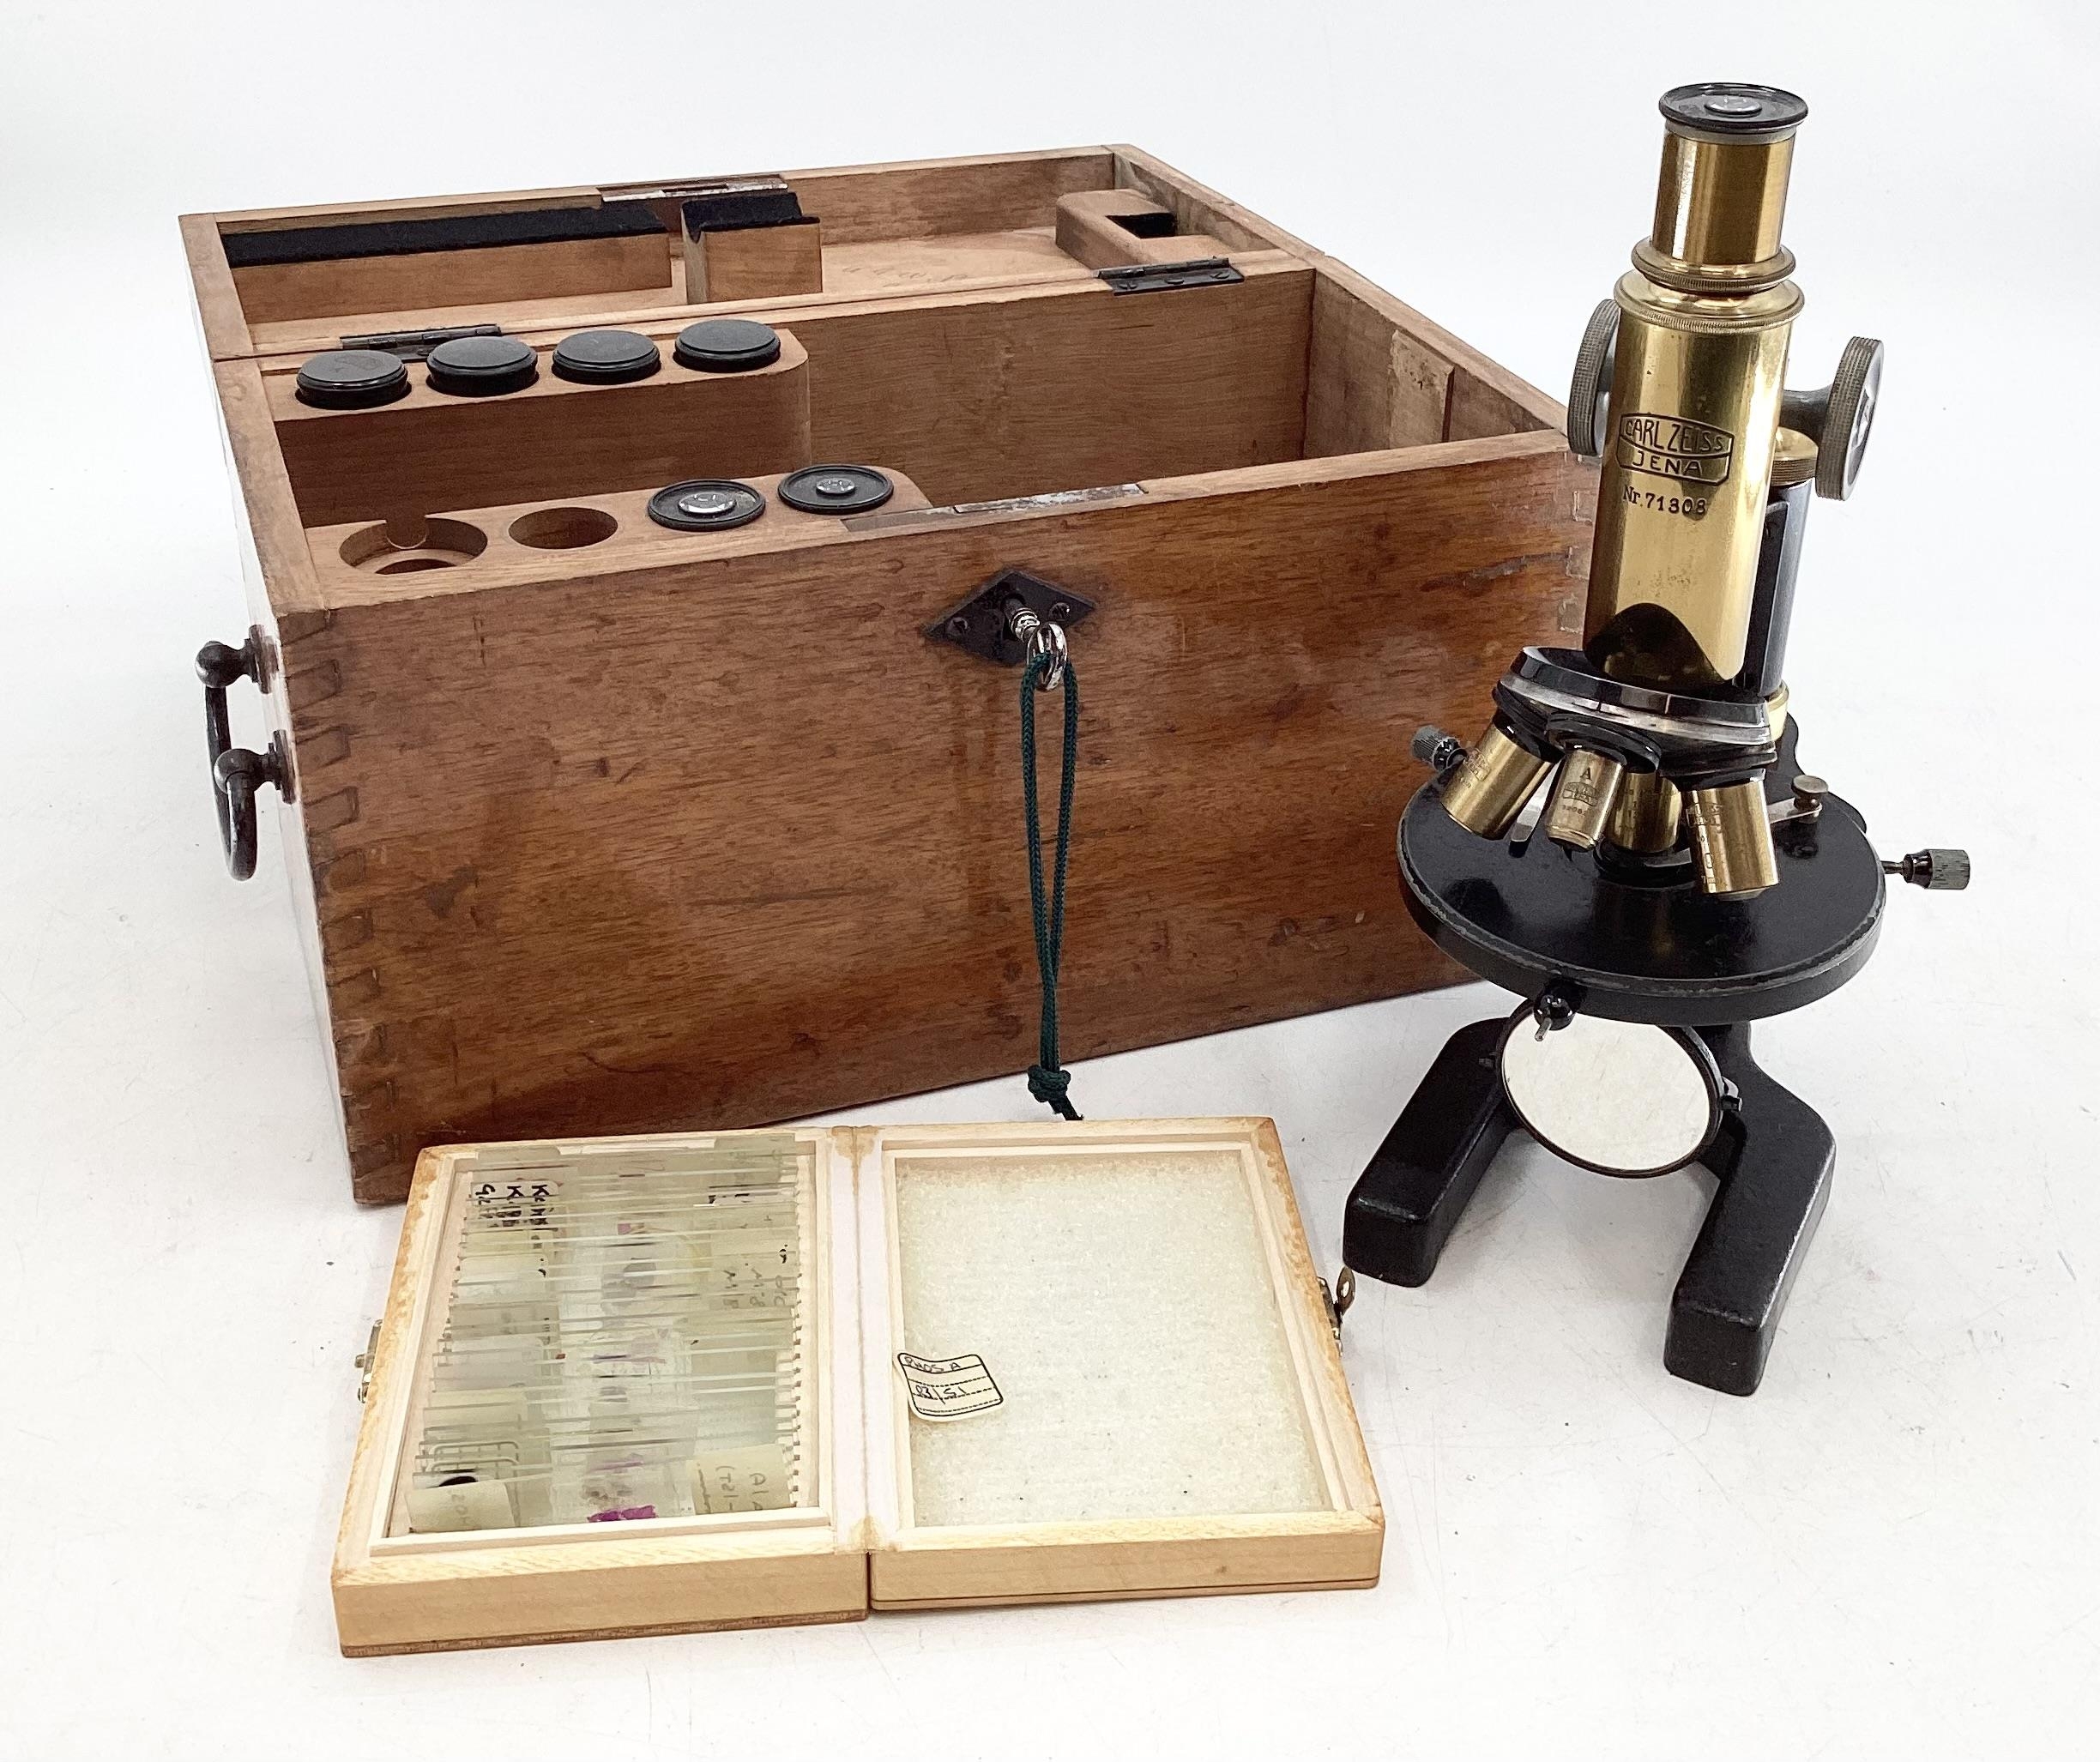 ZEISS microscope with glass slides